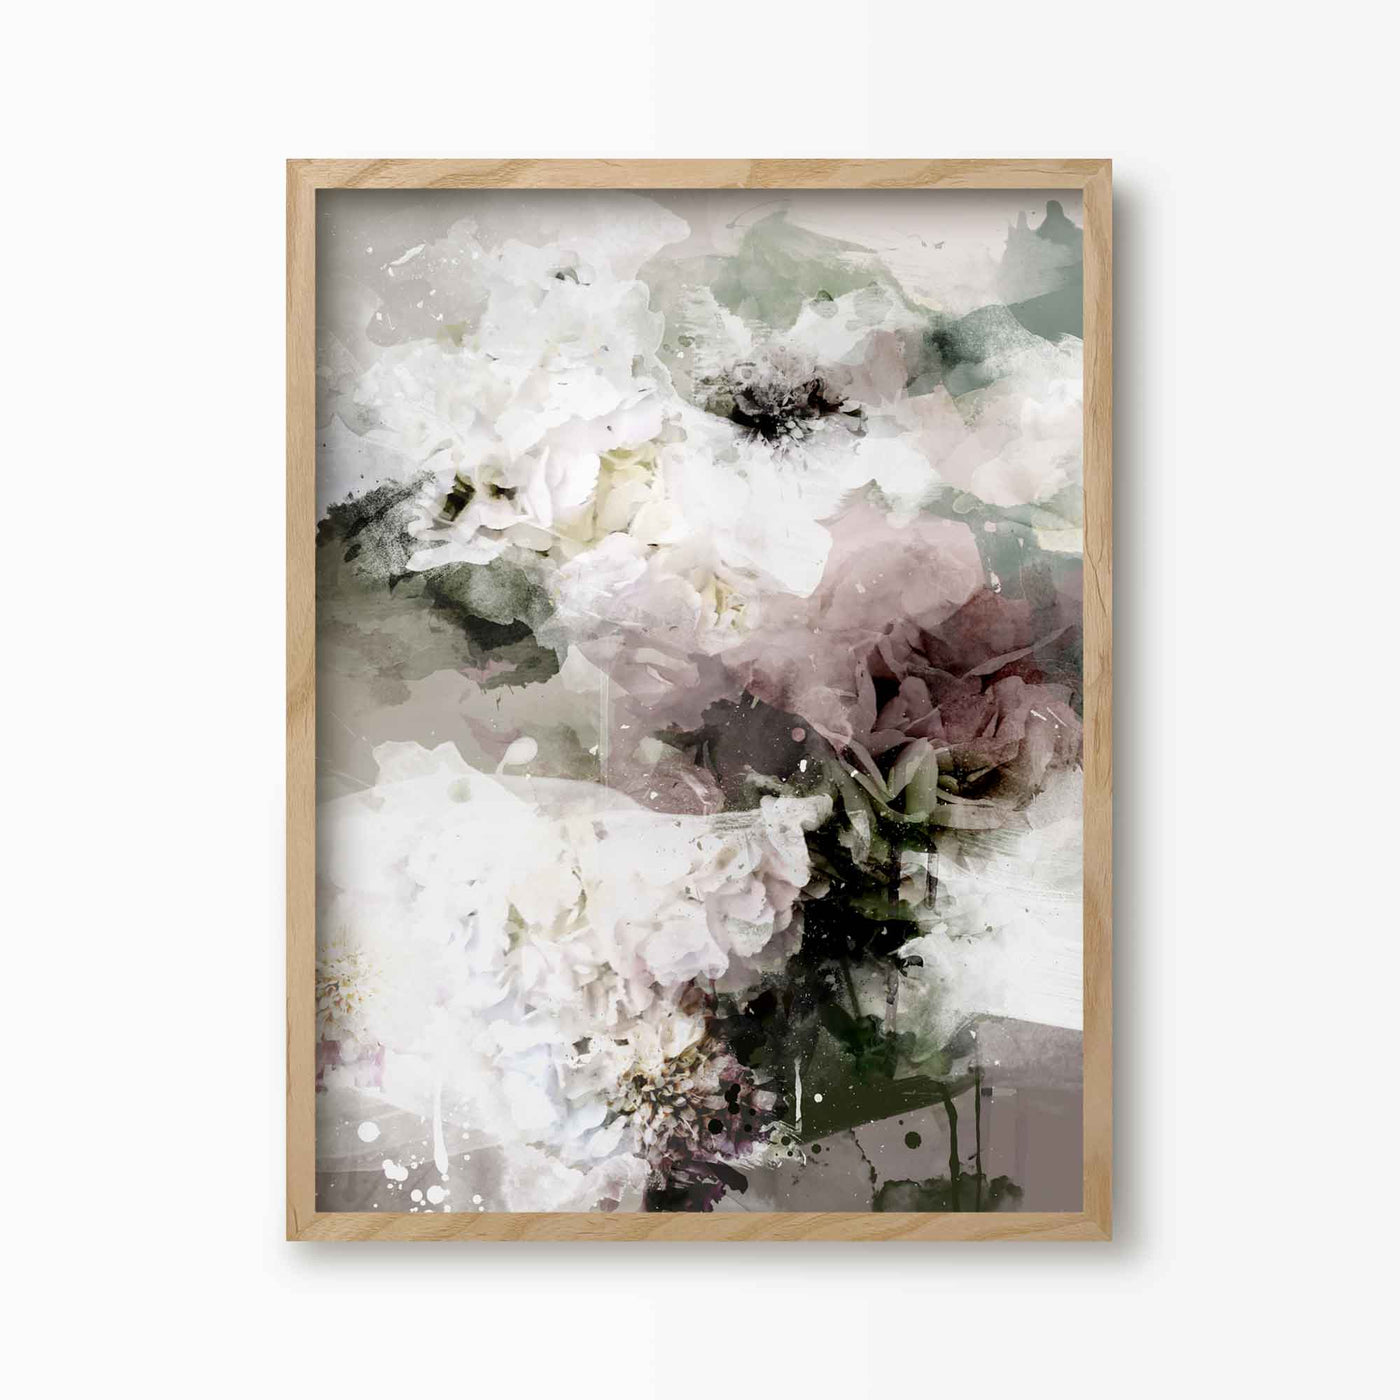 Green Lili 30x40cm (12x16") / Natural Frame Bed Of Roses Abstract Floral Art Print